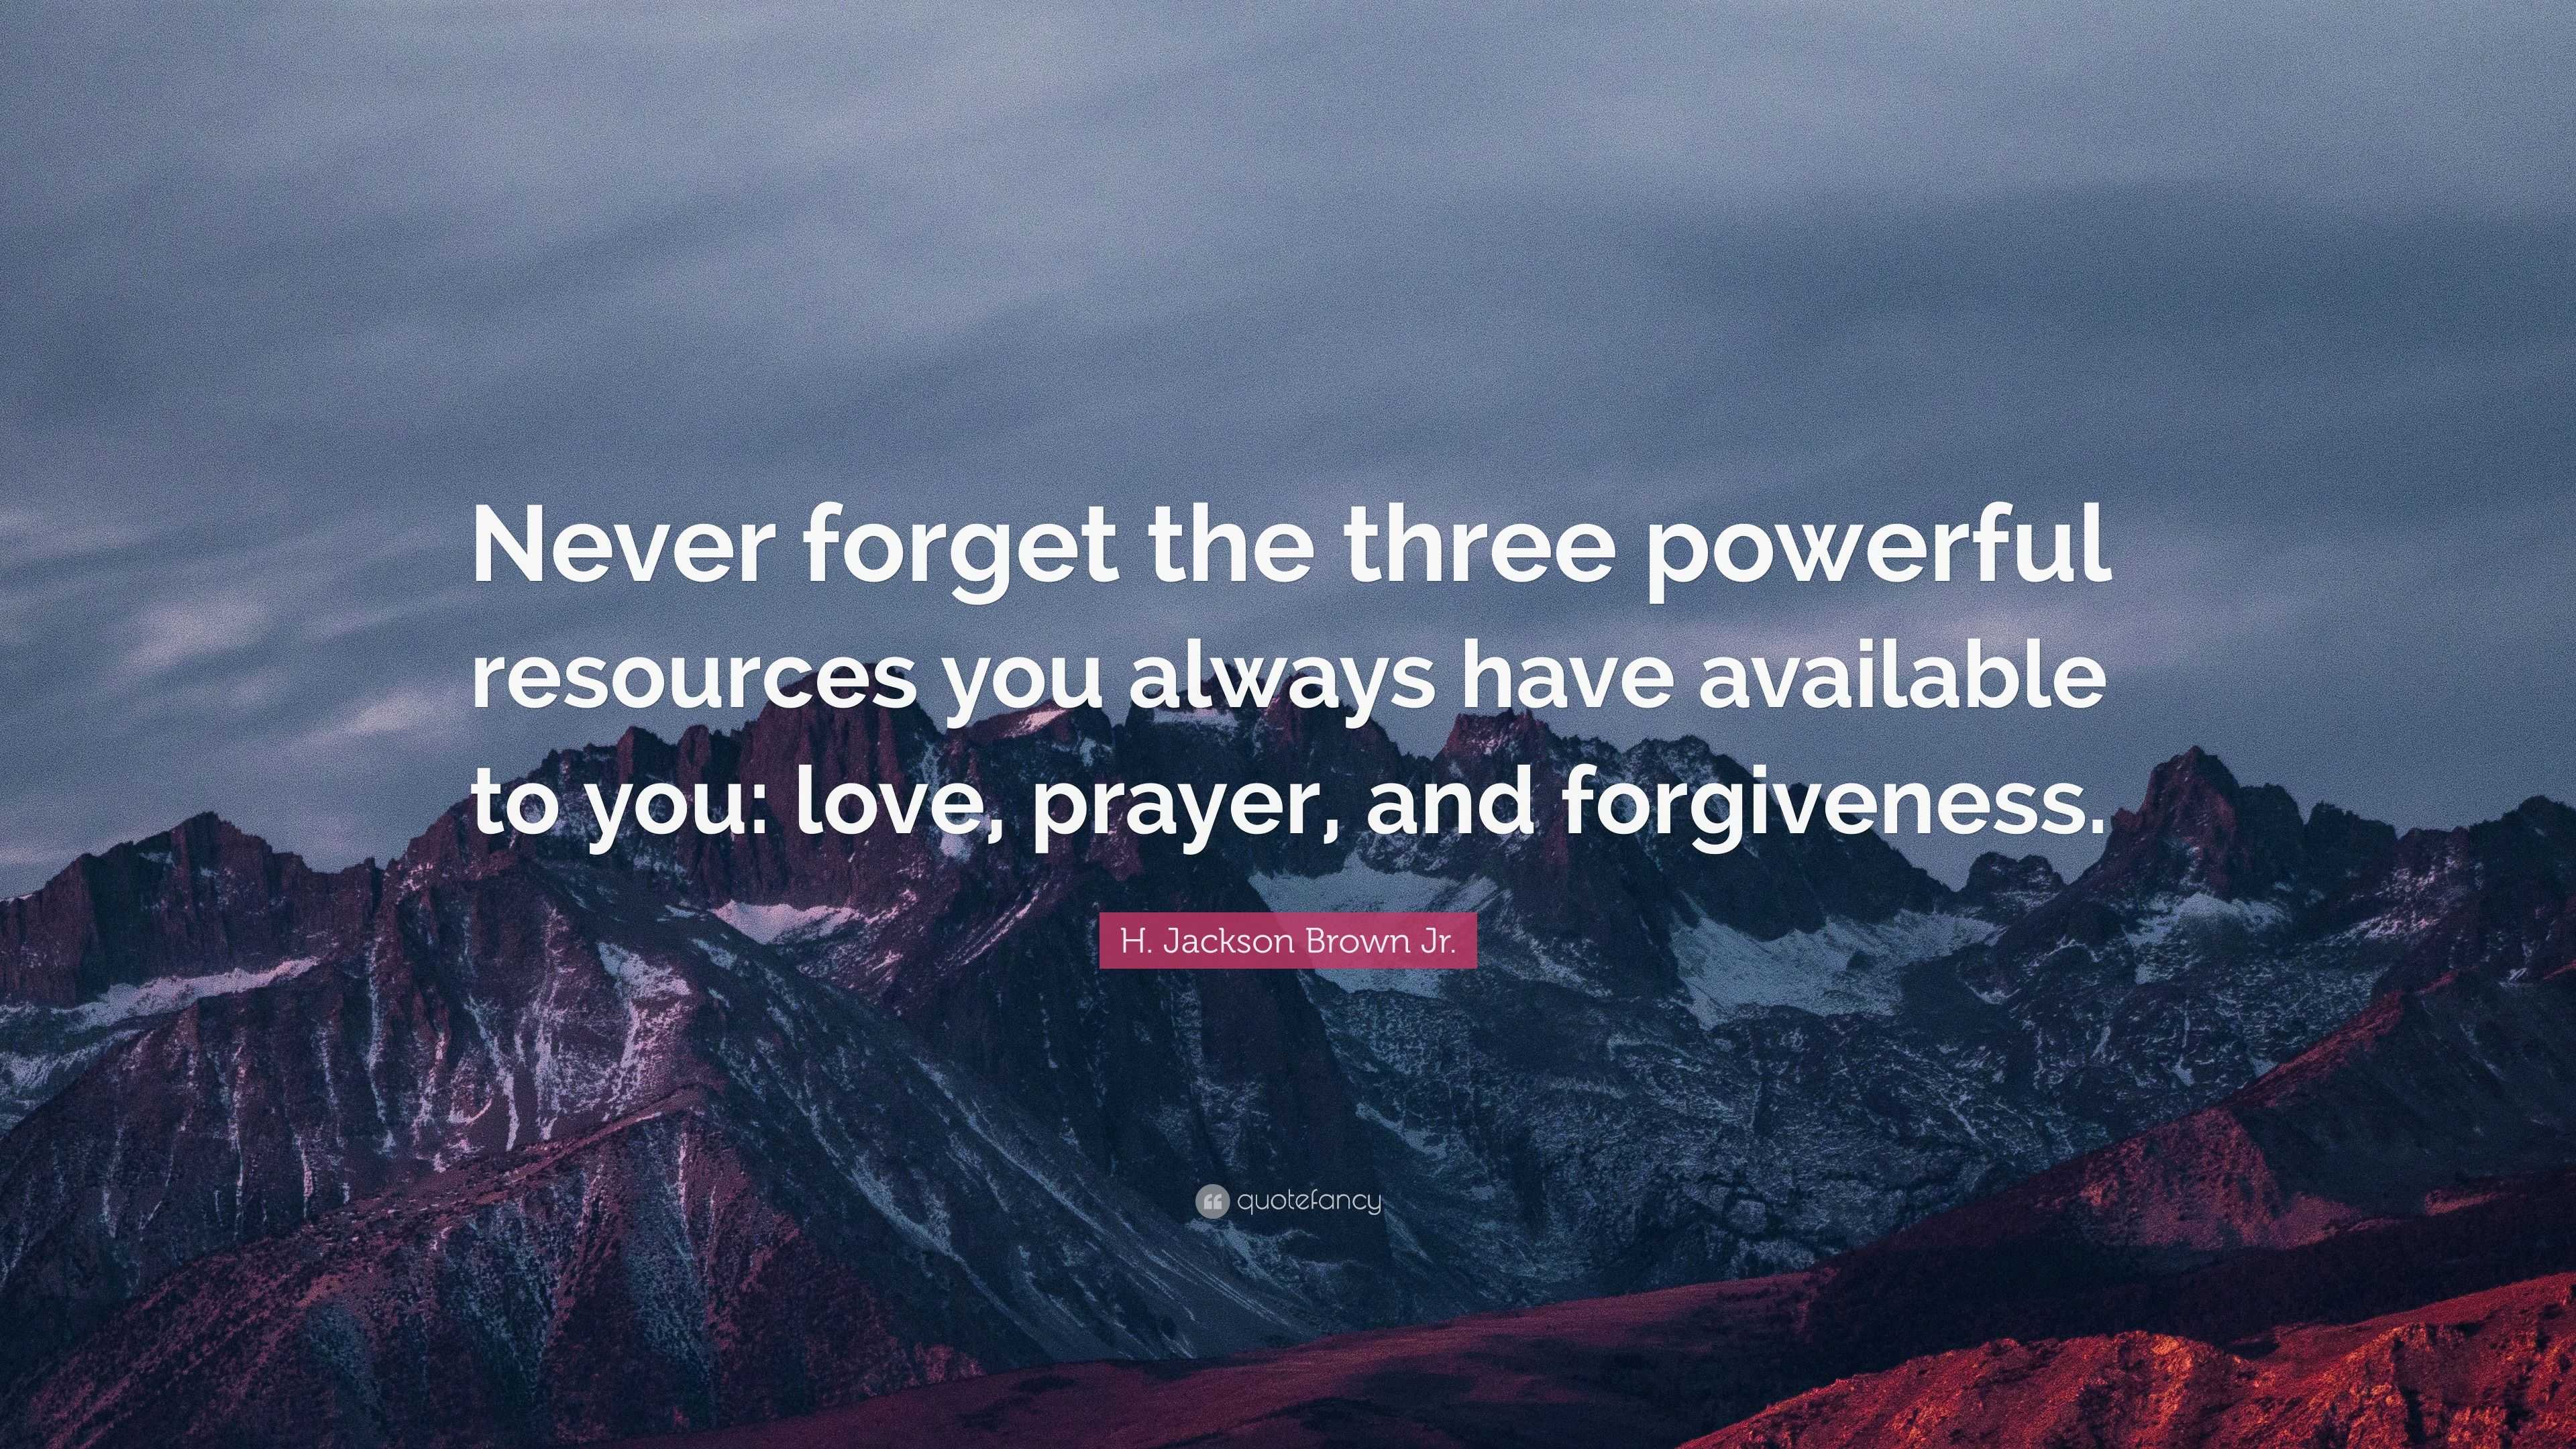 H. Jackson Brown Jr. Quote: “Never forget the three powerful resources ...